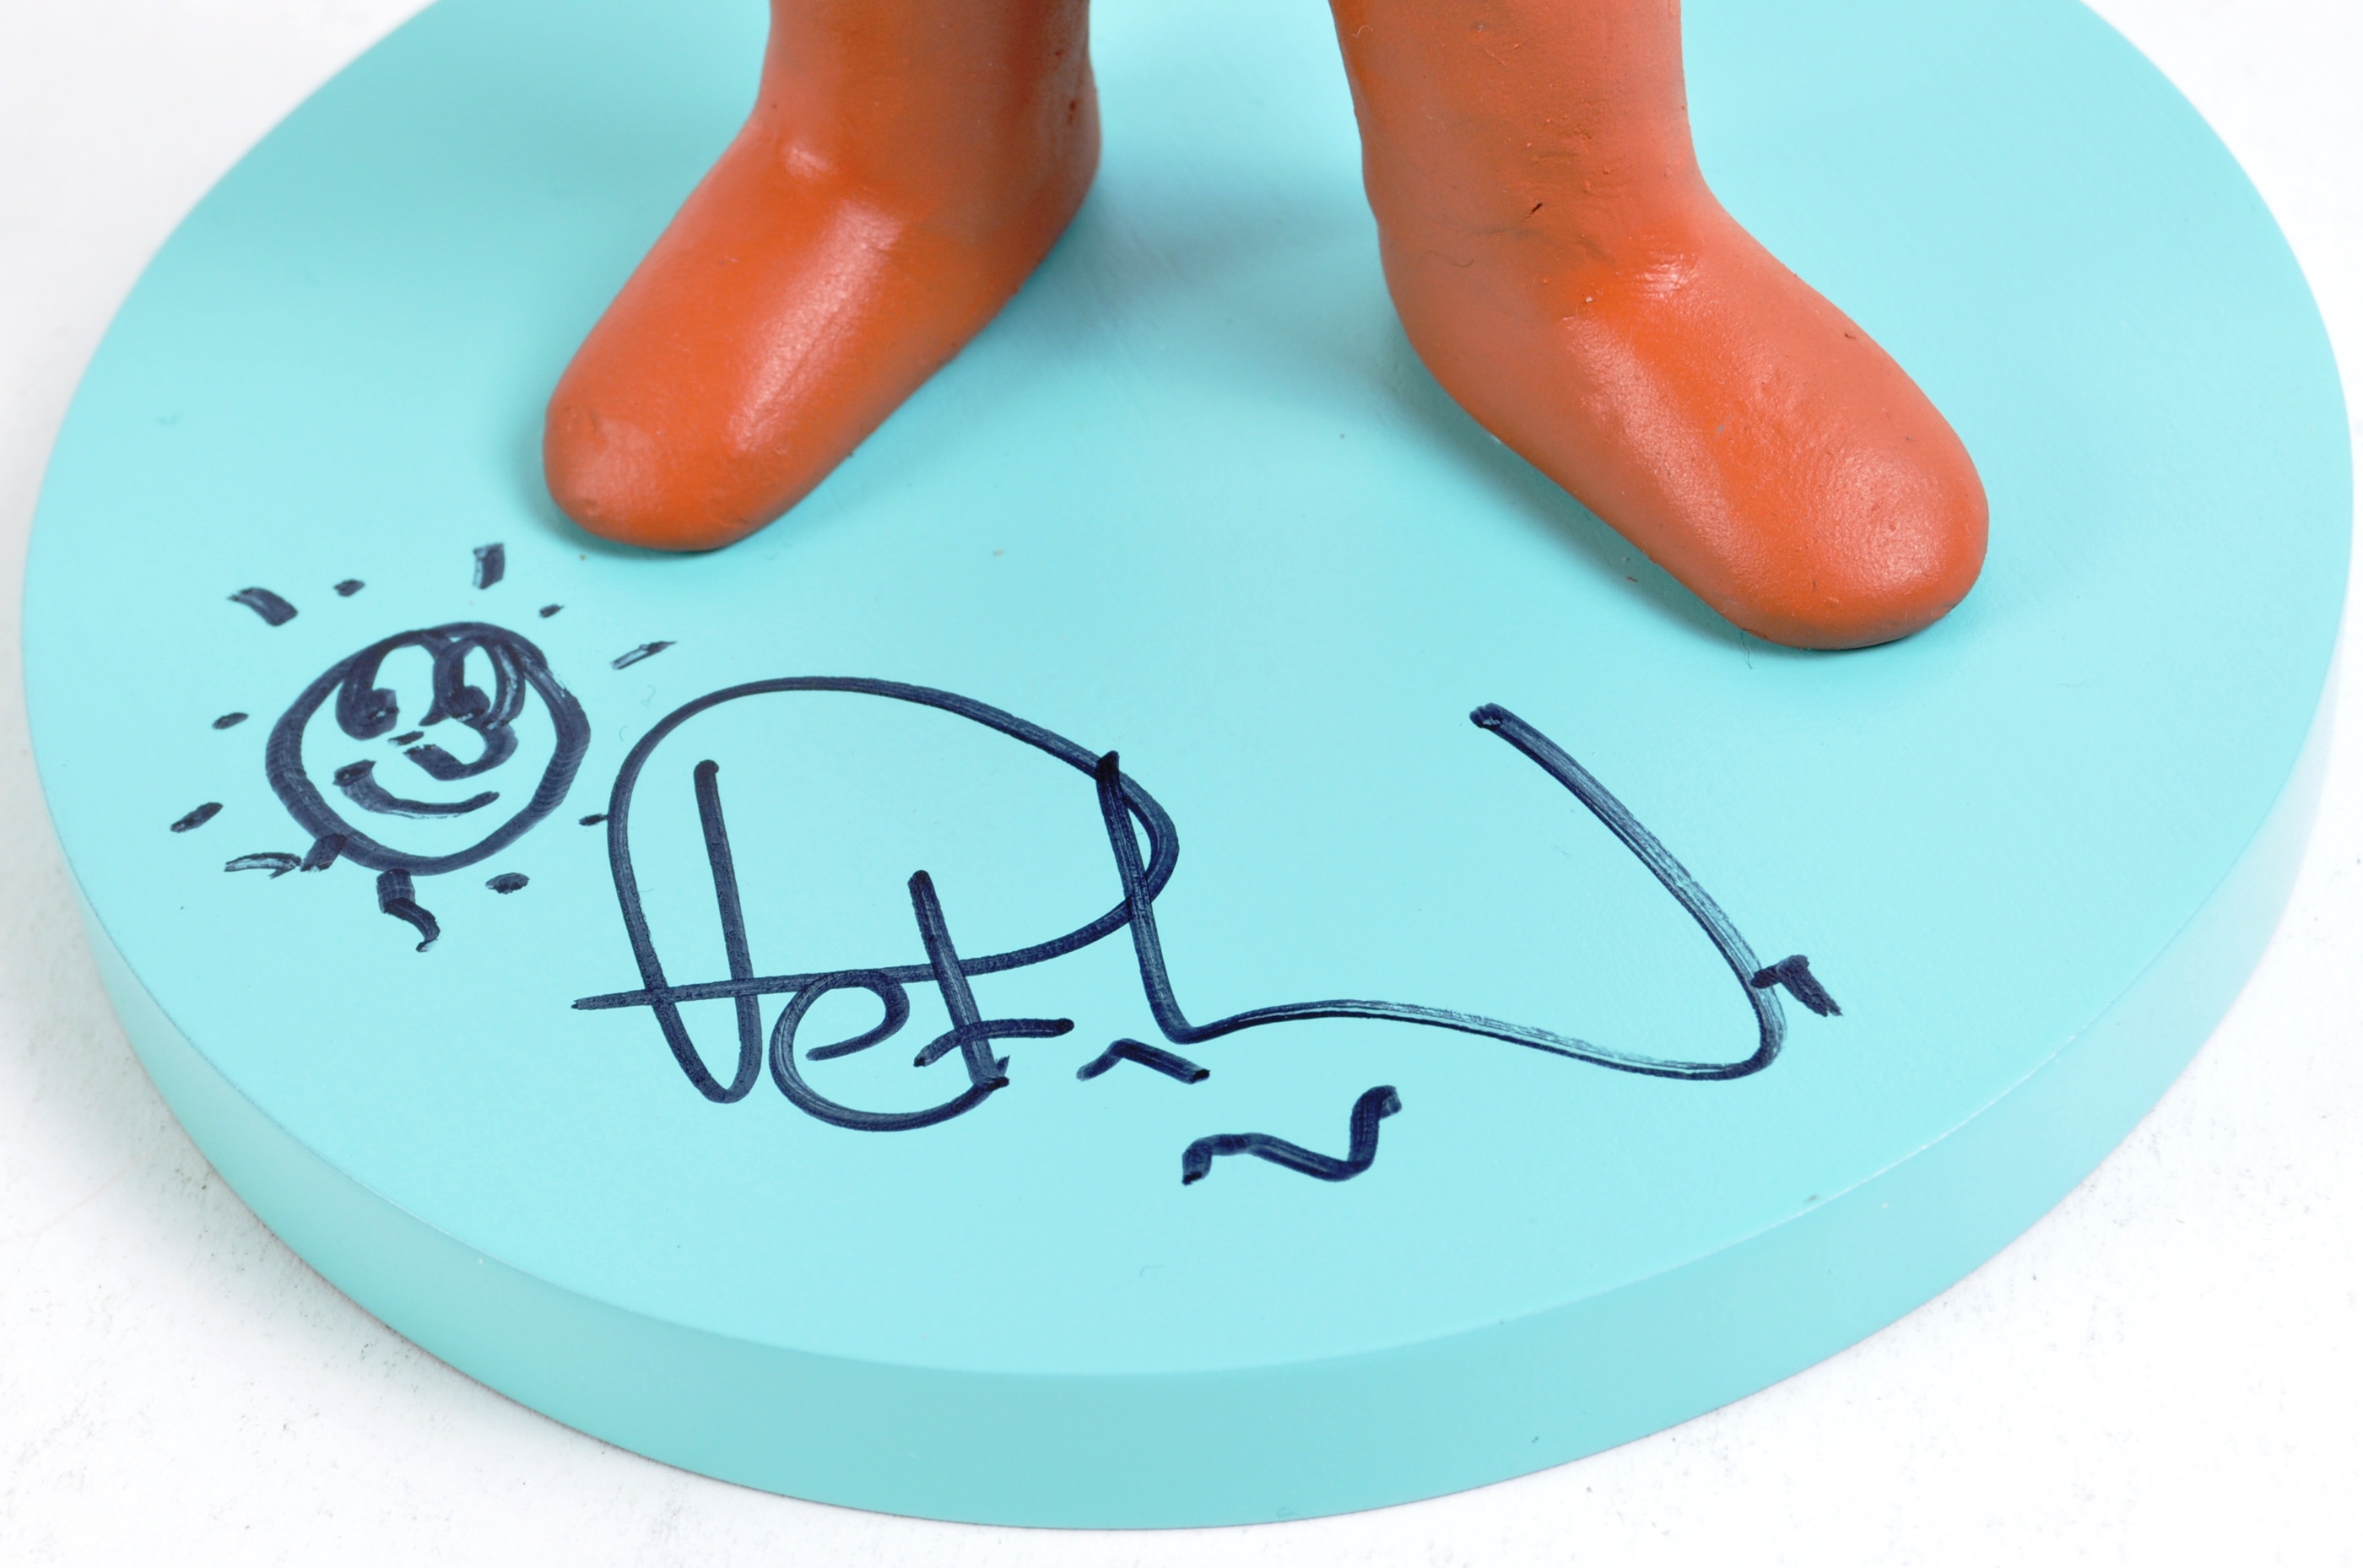 AARDMAN ANIMATIONS - MORPH - SIGNED MORPH STATUE WITH SKETCH - Image 2 of 4